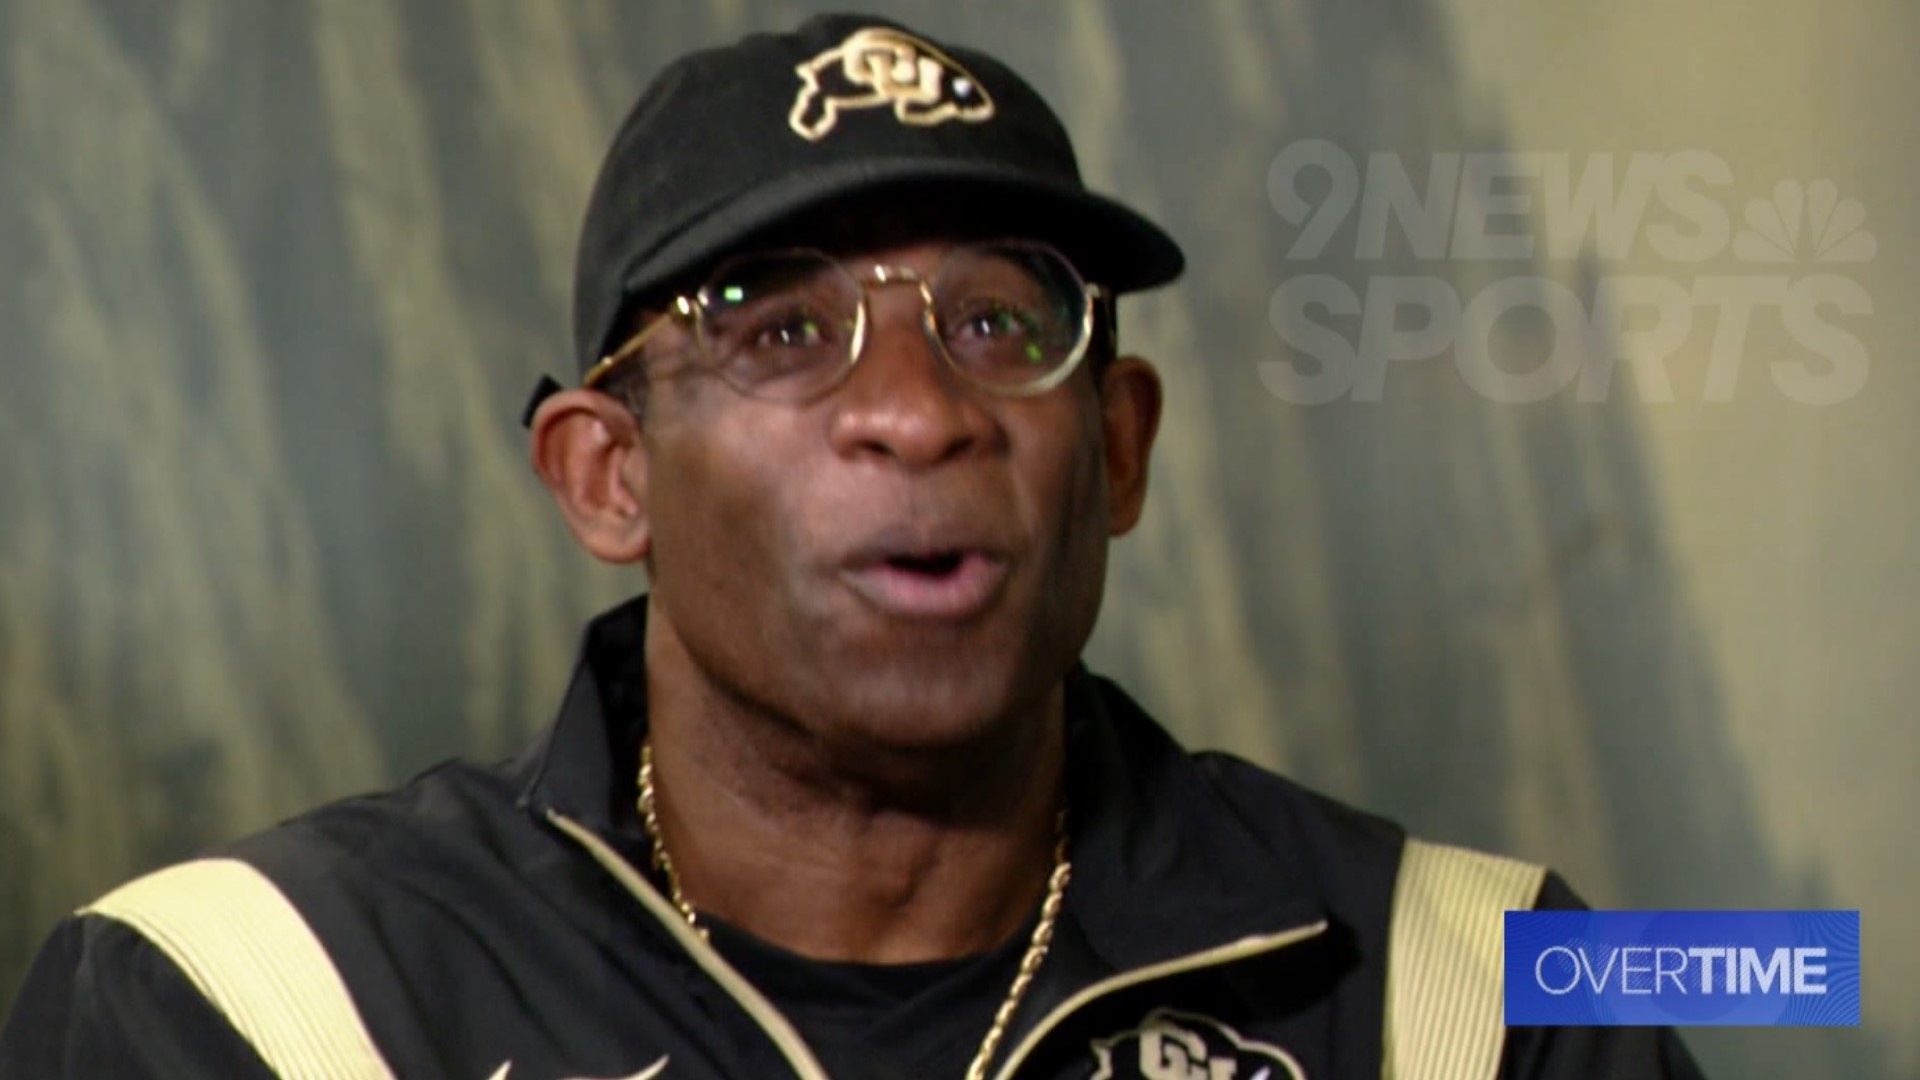 Arielle Orsuto sits down with Deion Sanders, the new head coach of the University of Colorado football team.